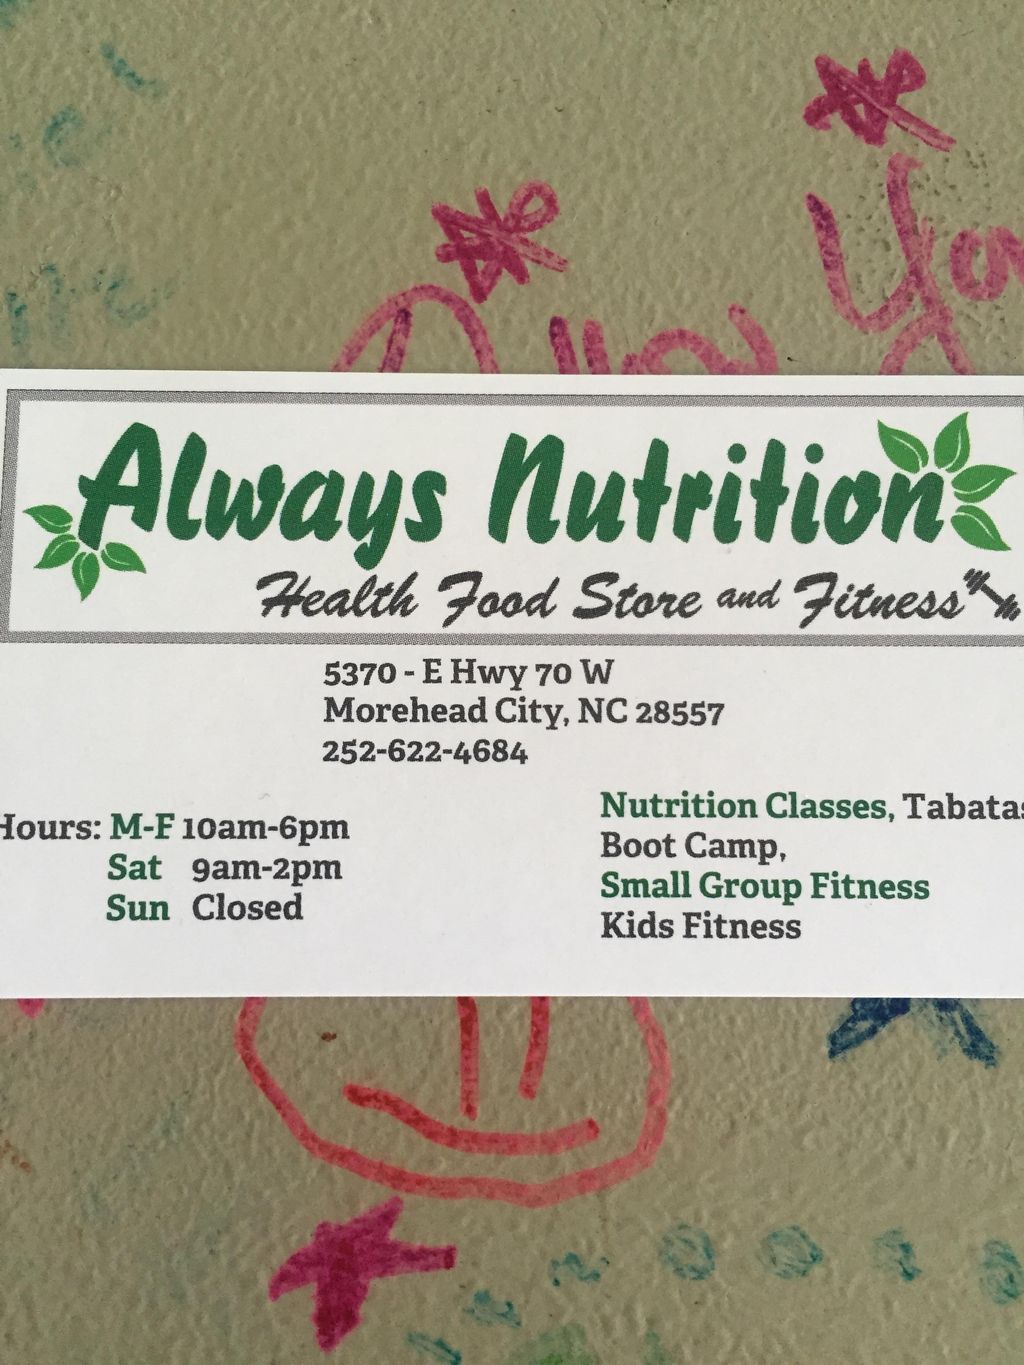 Always Nutrition and Fitness /Health Food Store...